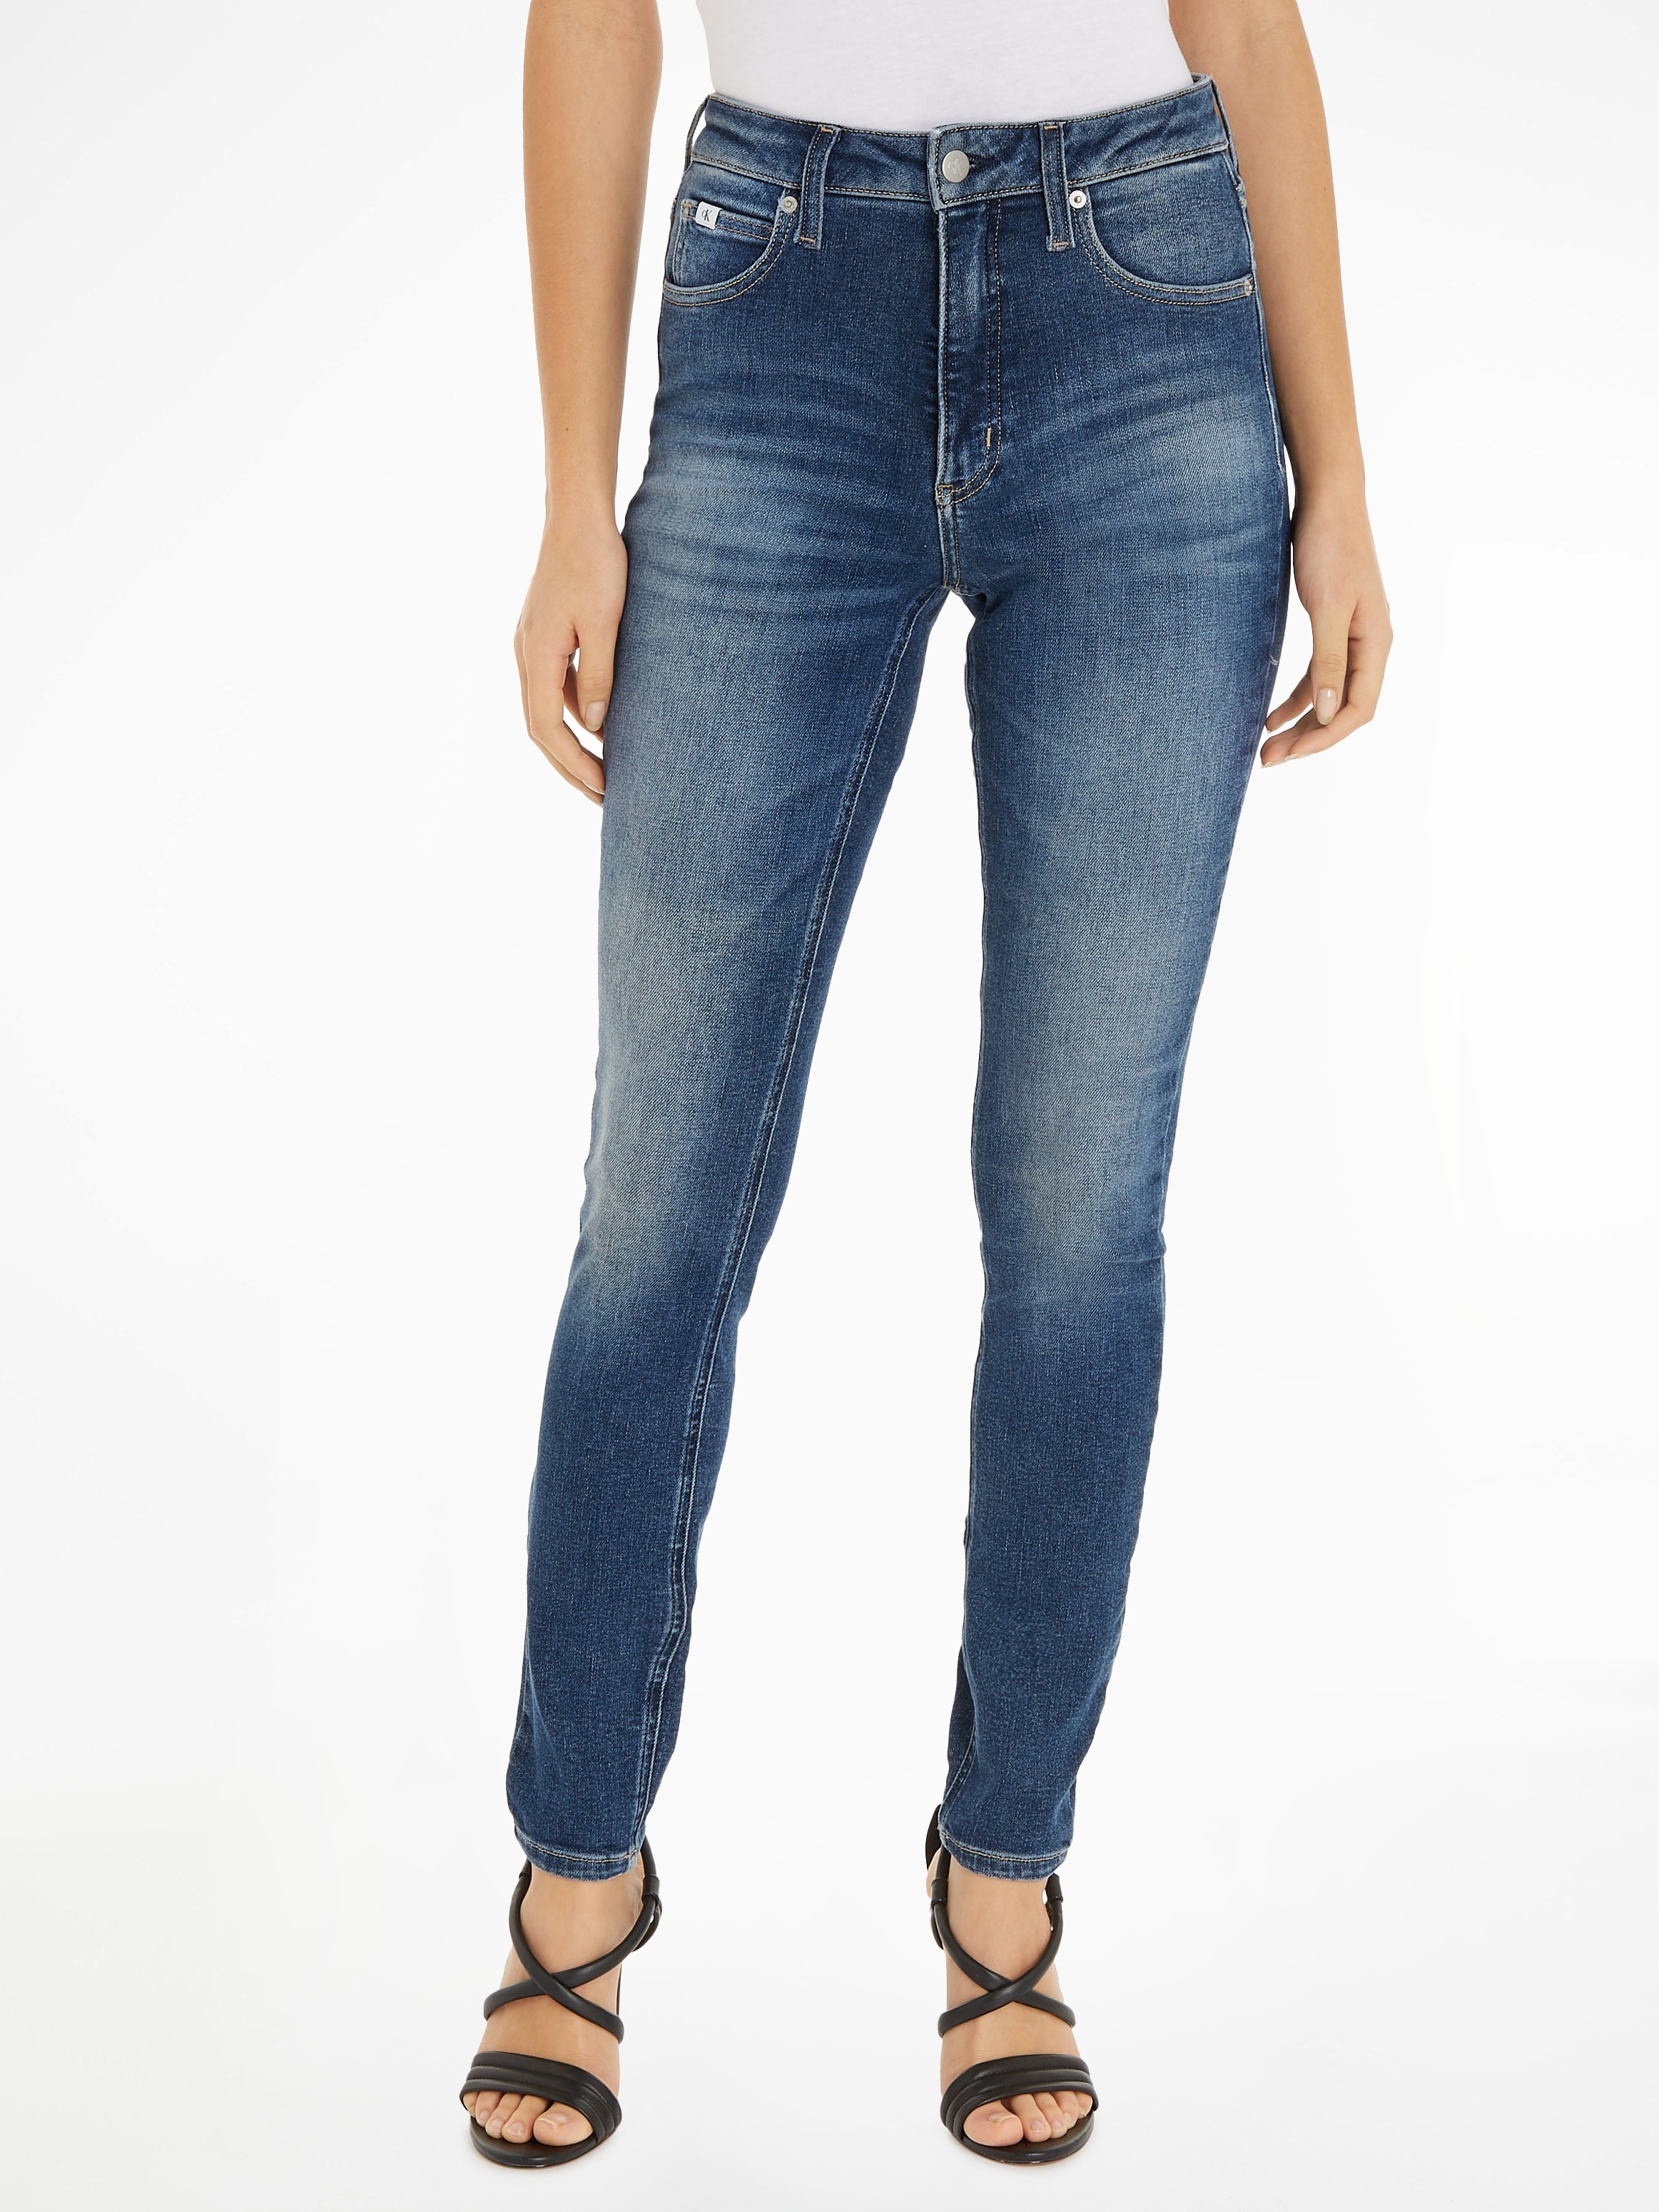 Calvin Klein Jeans Skinny-fit-Jeans »HIGH RISE SKINNY«, im 5-Pocket-Style